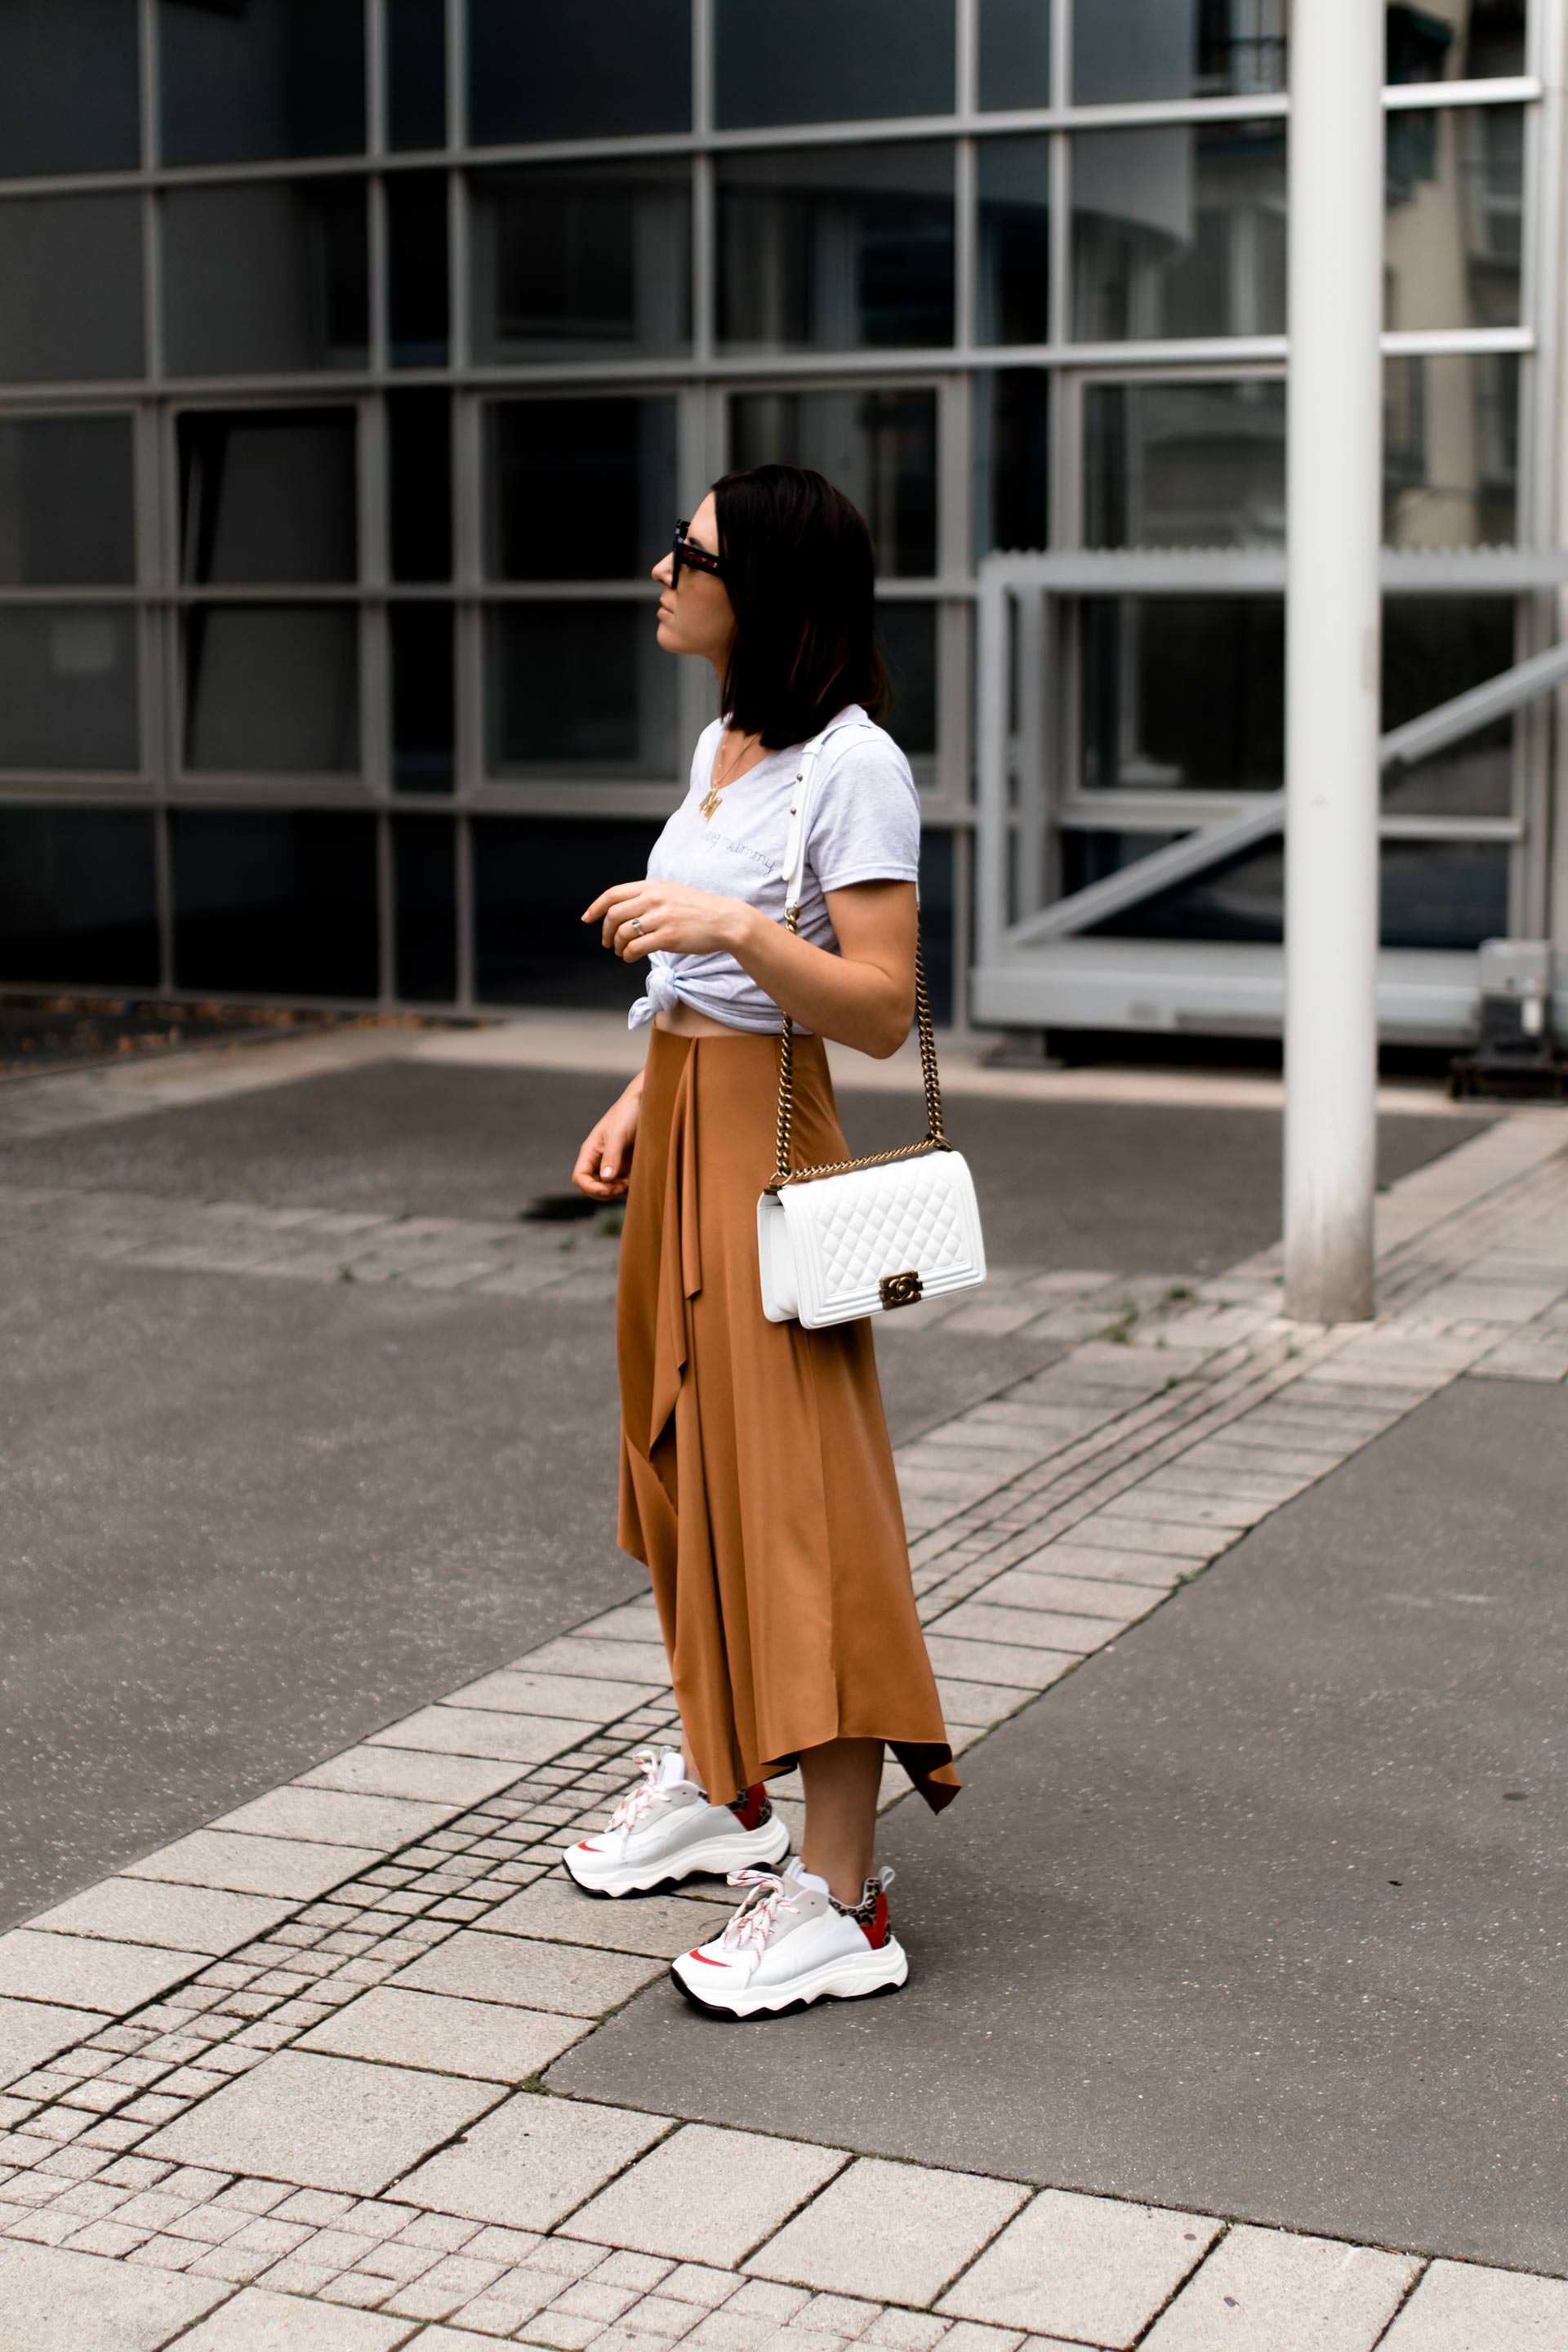 enthält unbeauftragte Werbung, Chunky Sneakers Trend, Dad Sneakers stylen, Ugly Trainers kombinieren, Sommer Outfit mit Midirock, Alltagsoutfit mit Rock und Sneakers, Chanel Boy Tasche, Streetstyle, Modeblogger, www.whoismocca.com #chunky #sneakers #sommermode #ootd #modetrends #chanel